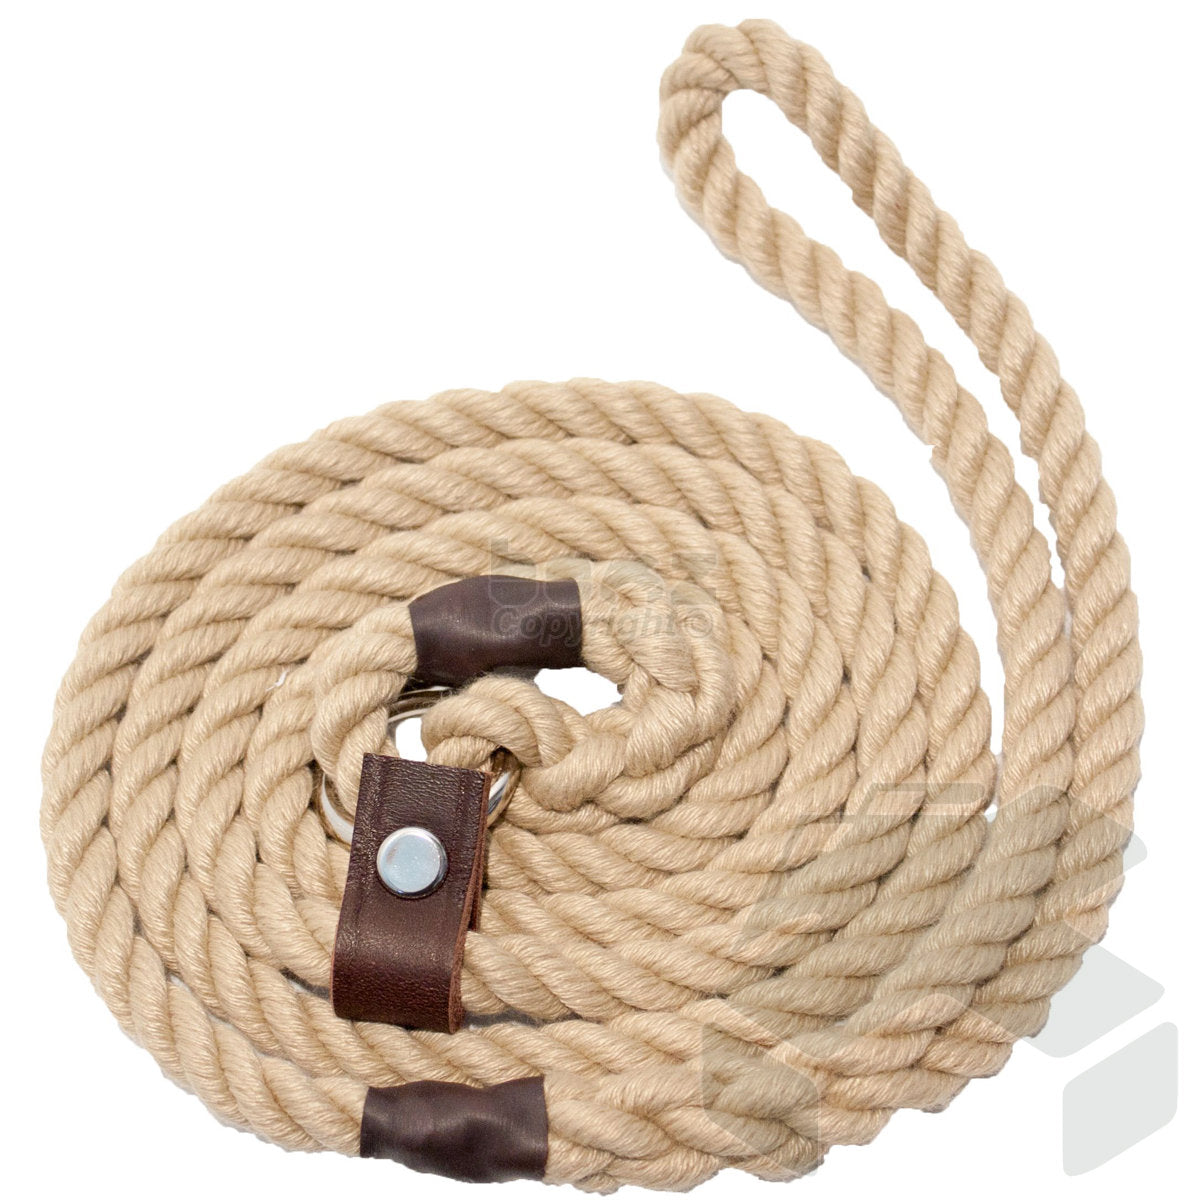 Bisley Rope Slip Lead, Dog Lead with Leather Fittings - Natural